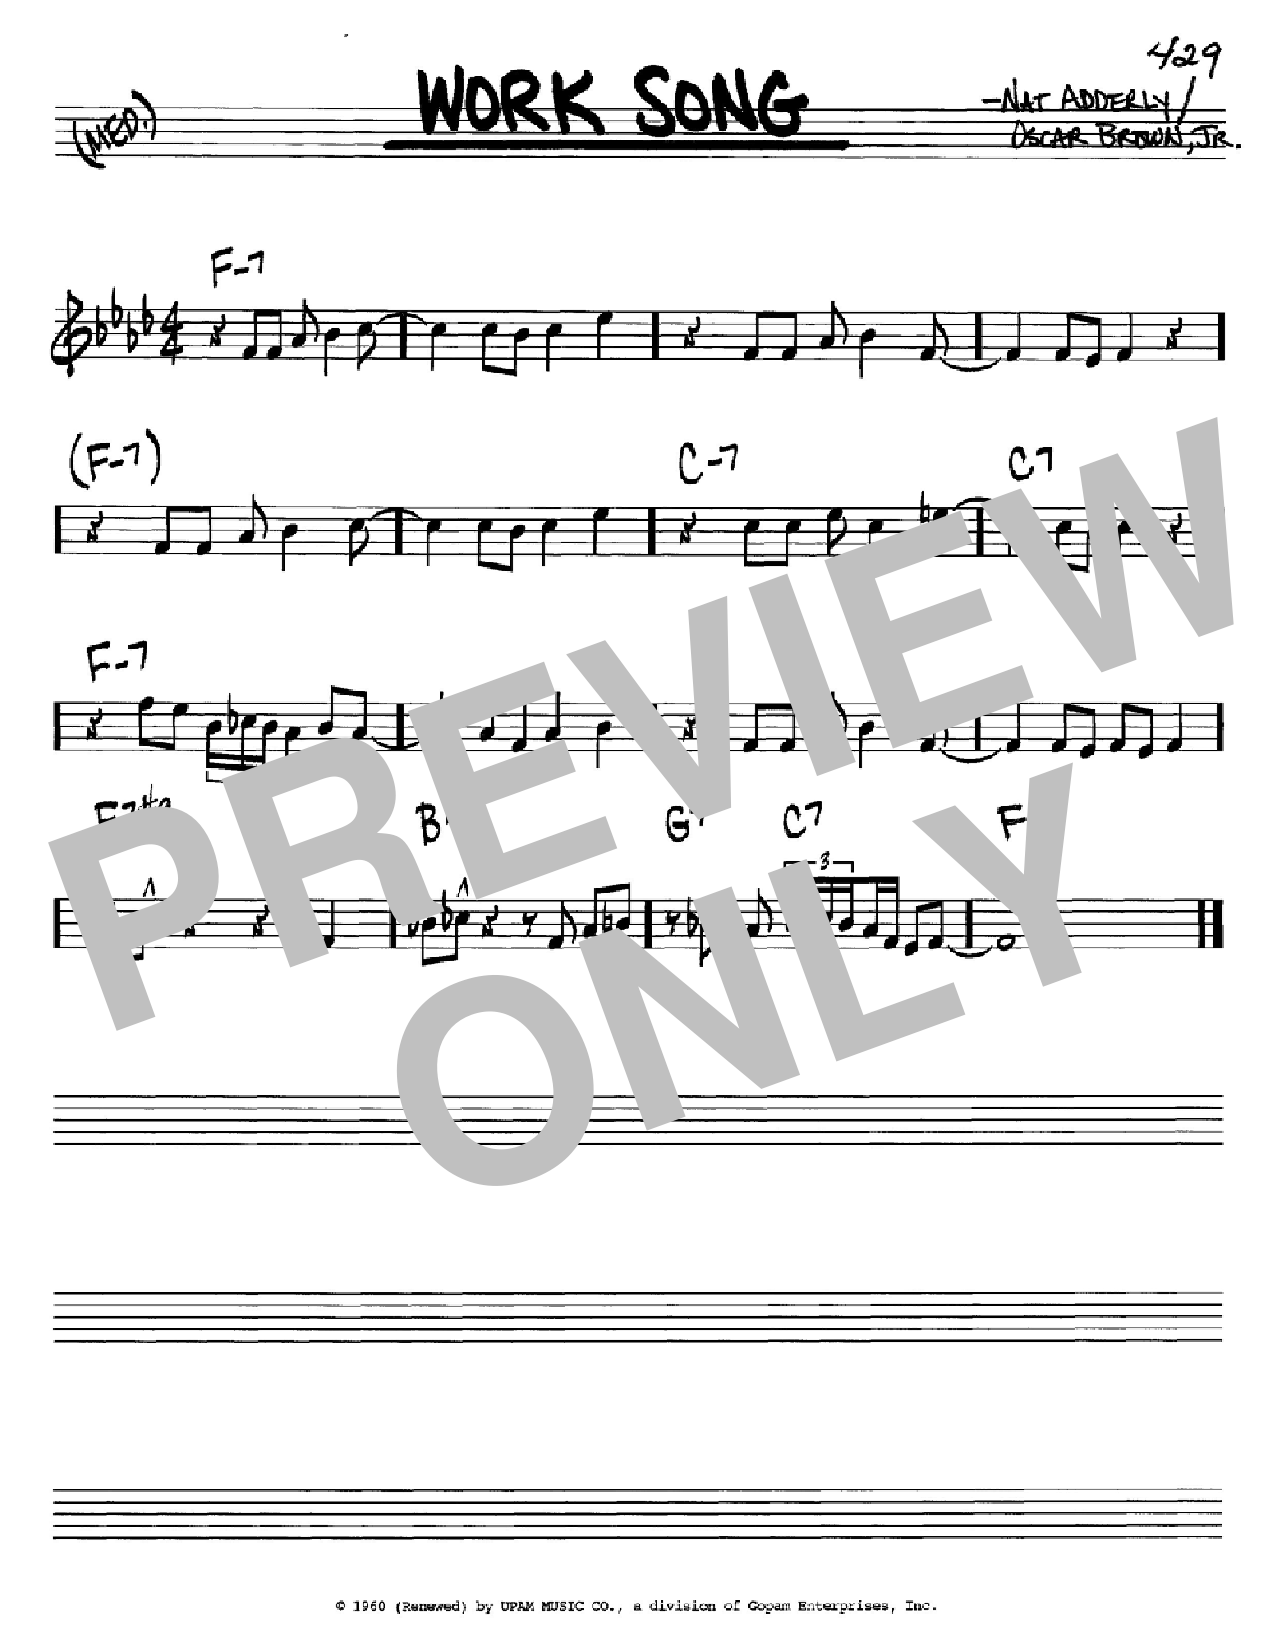 Cannonball Adderley Work Song sheet music notes printable PDF score